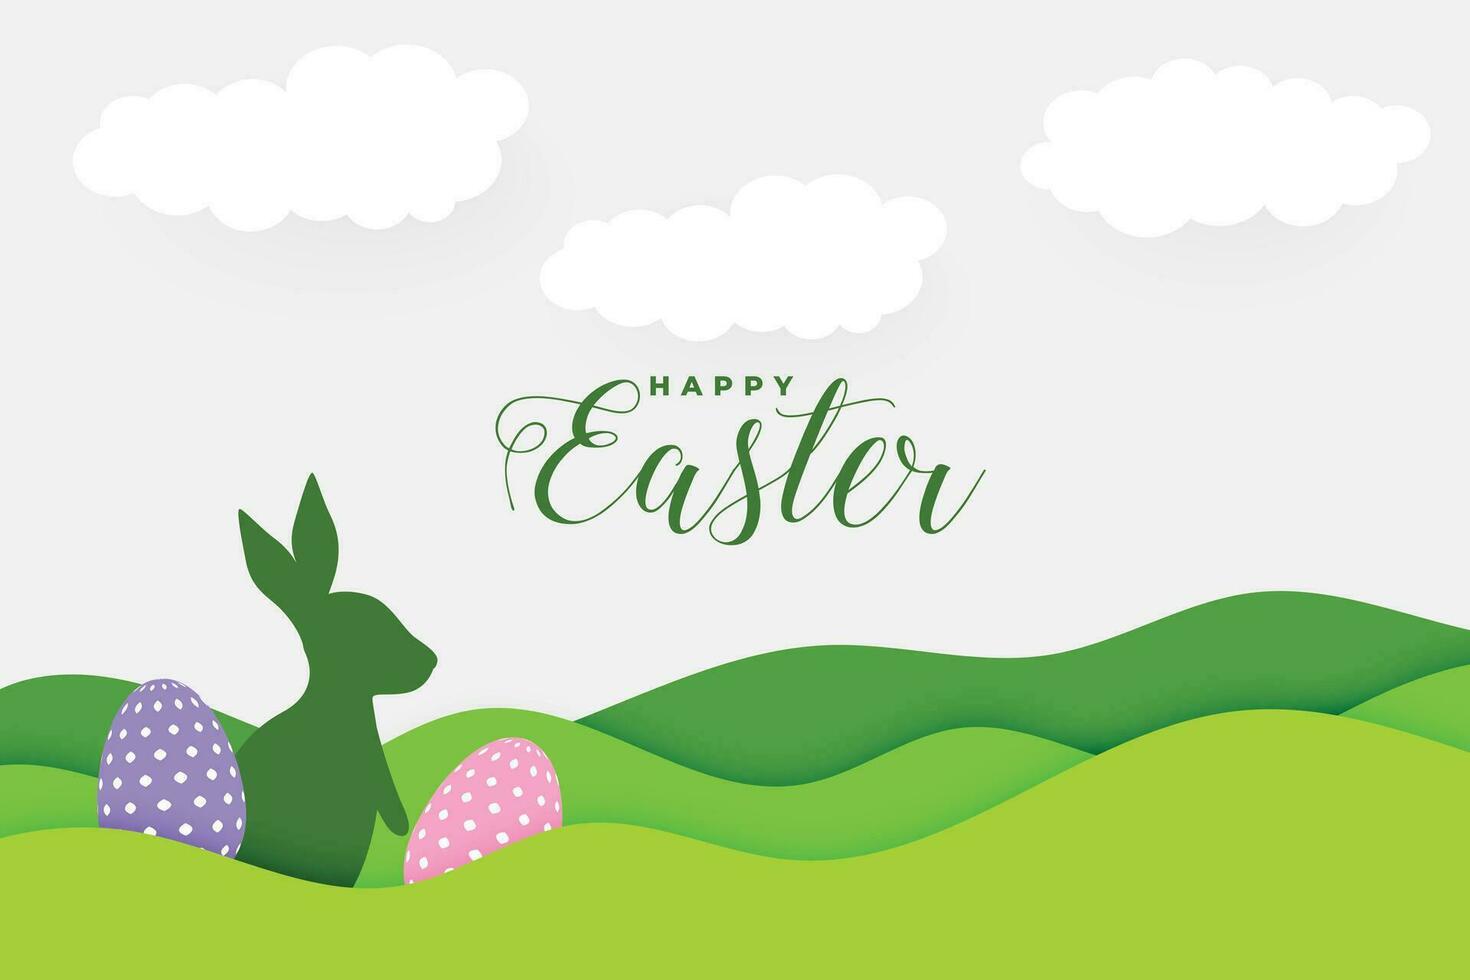 paper style happy easter day card design vector